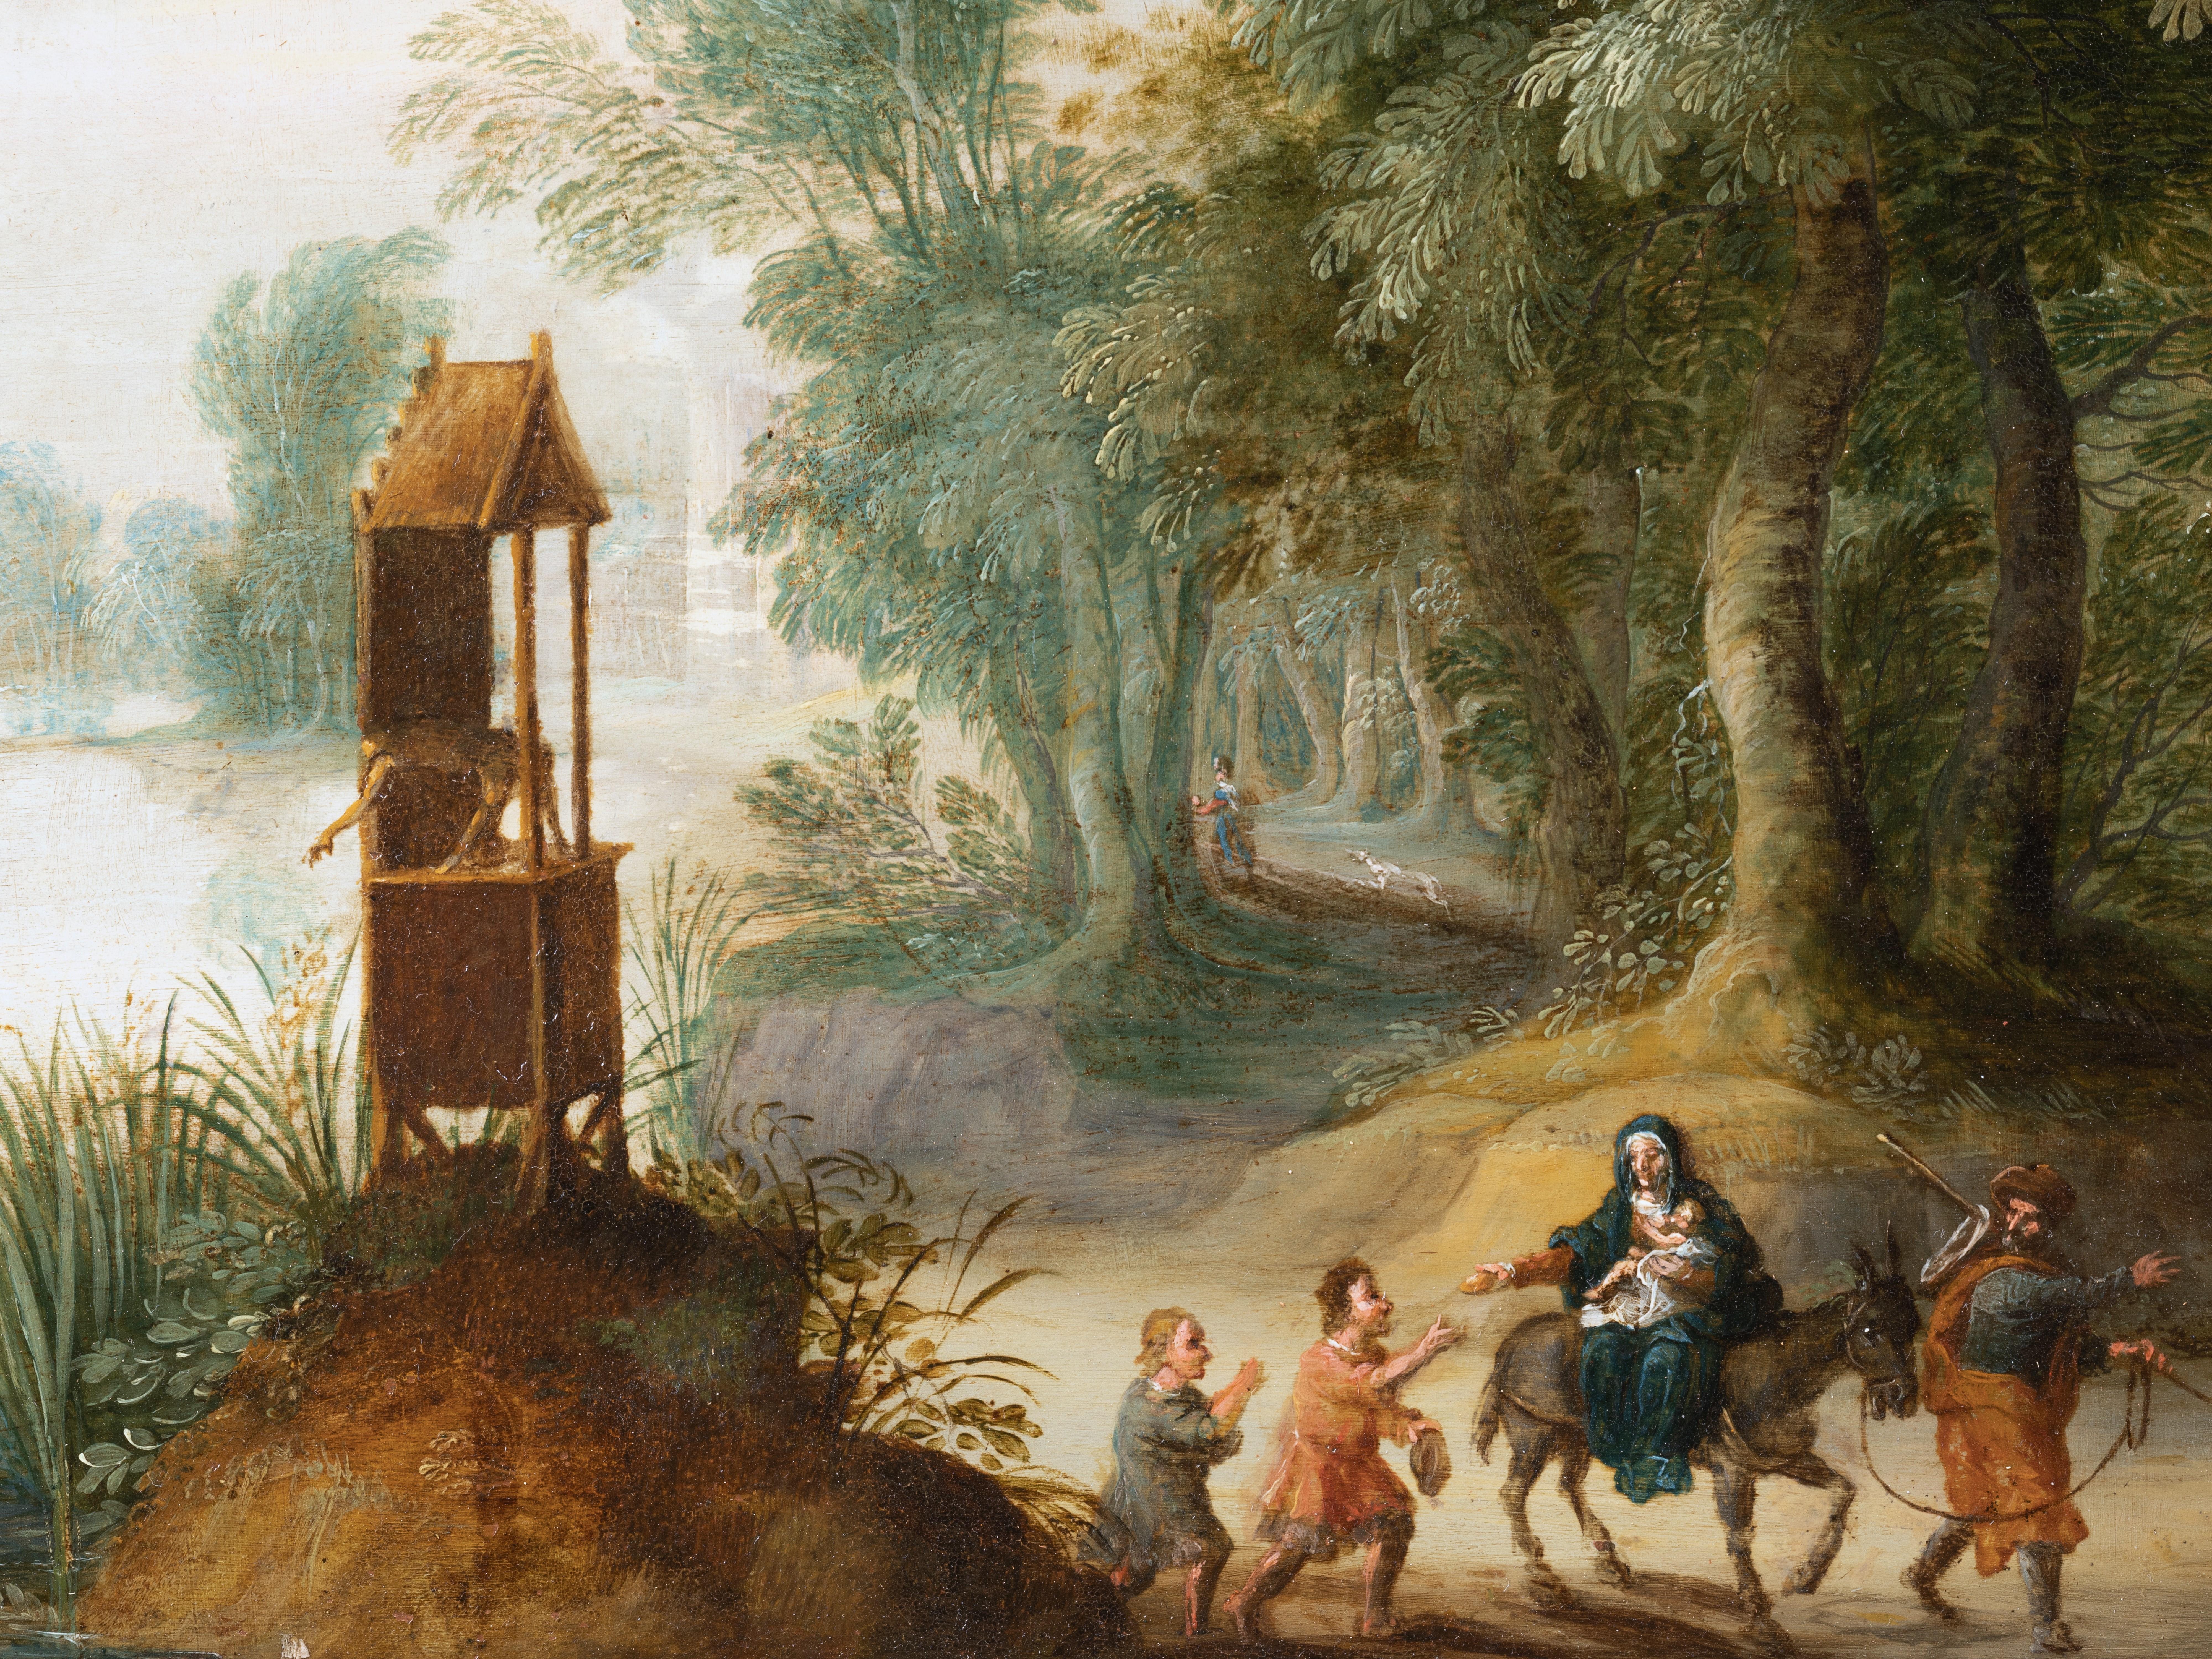 LANDSCAPE WITH FLIGHT TO EGYPT,
JASPER VAN DER LANEN  (ANTWERP, 1585 - 1634)
17TH CENTURY FLEMISH SCHOOL
ANTWERP CIRCA 1630

Oil on copper, dimensions: h. 10.23 in, w. 14.96 in
Flemish style frame in ebonized wood adorned with wavy moldings and wood